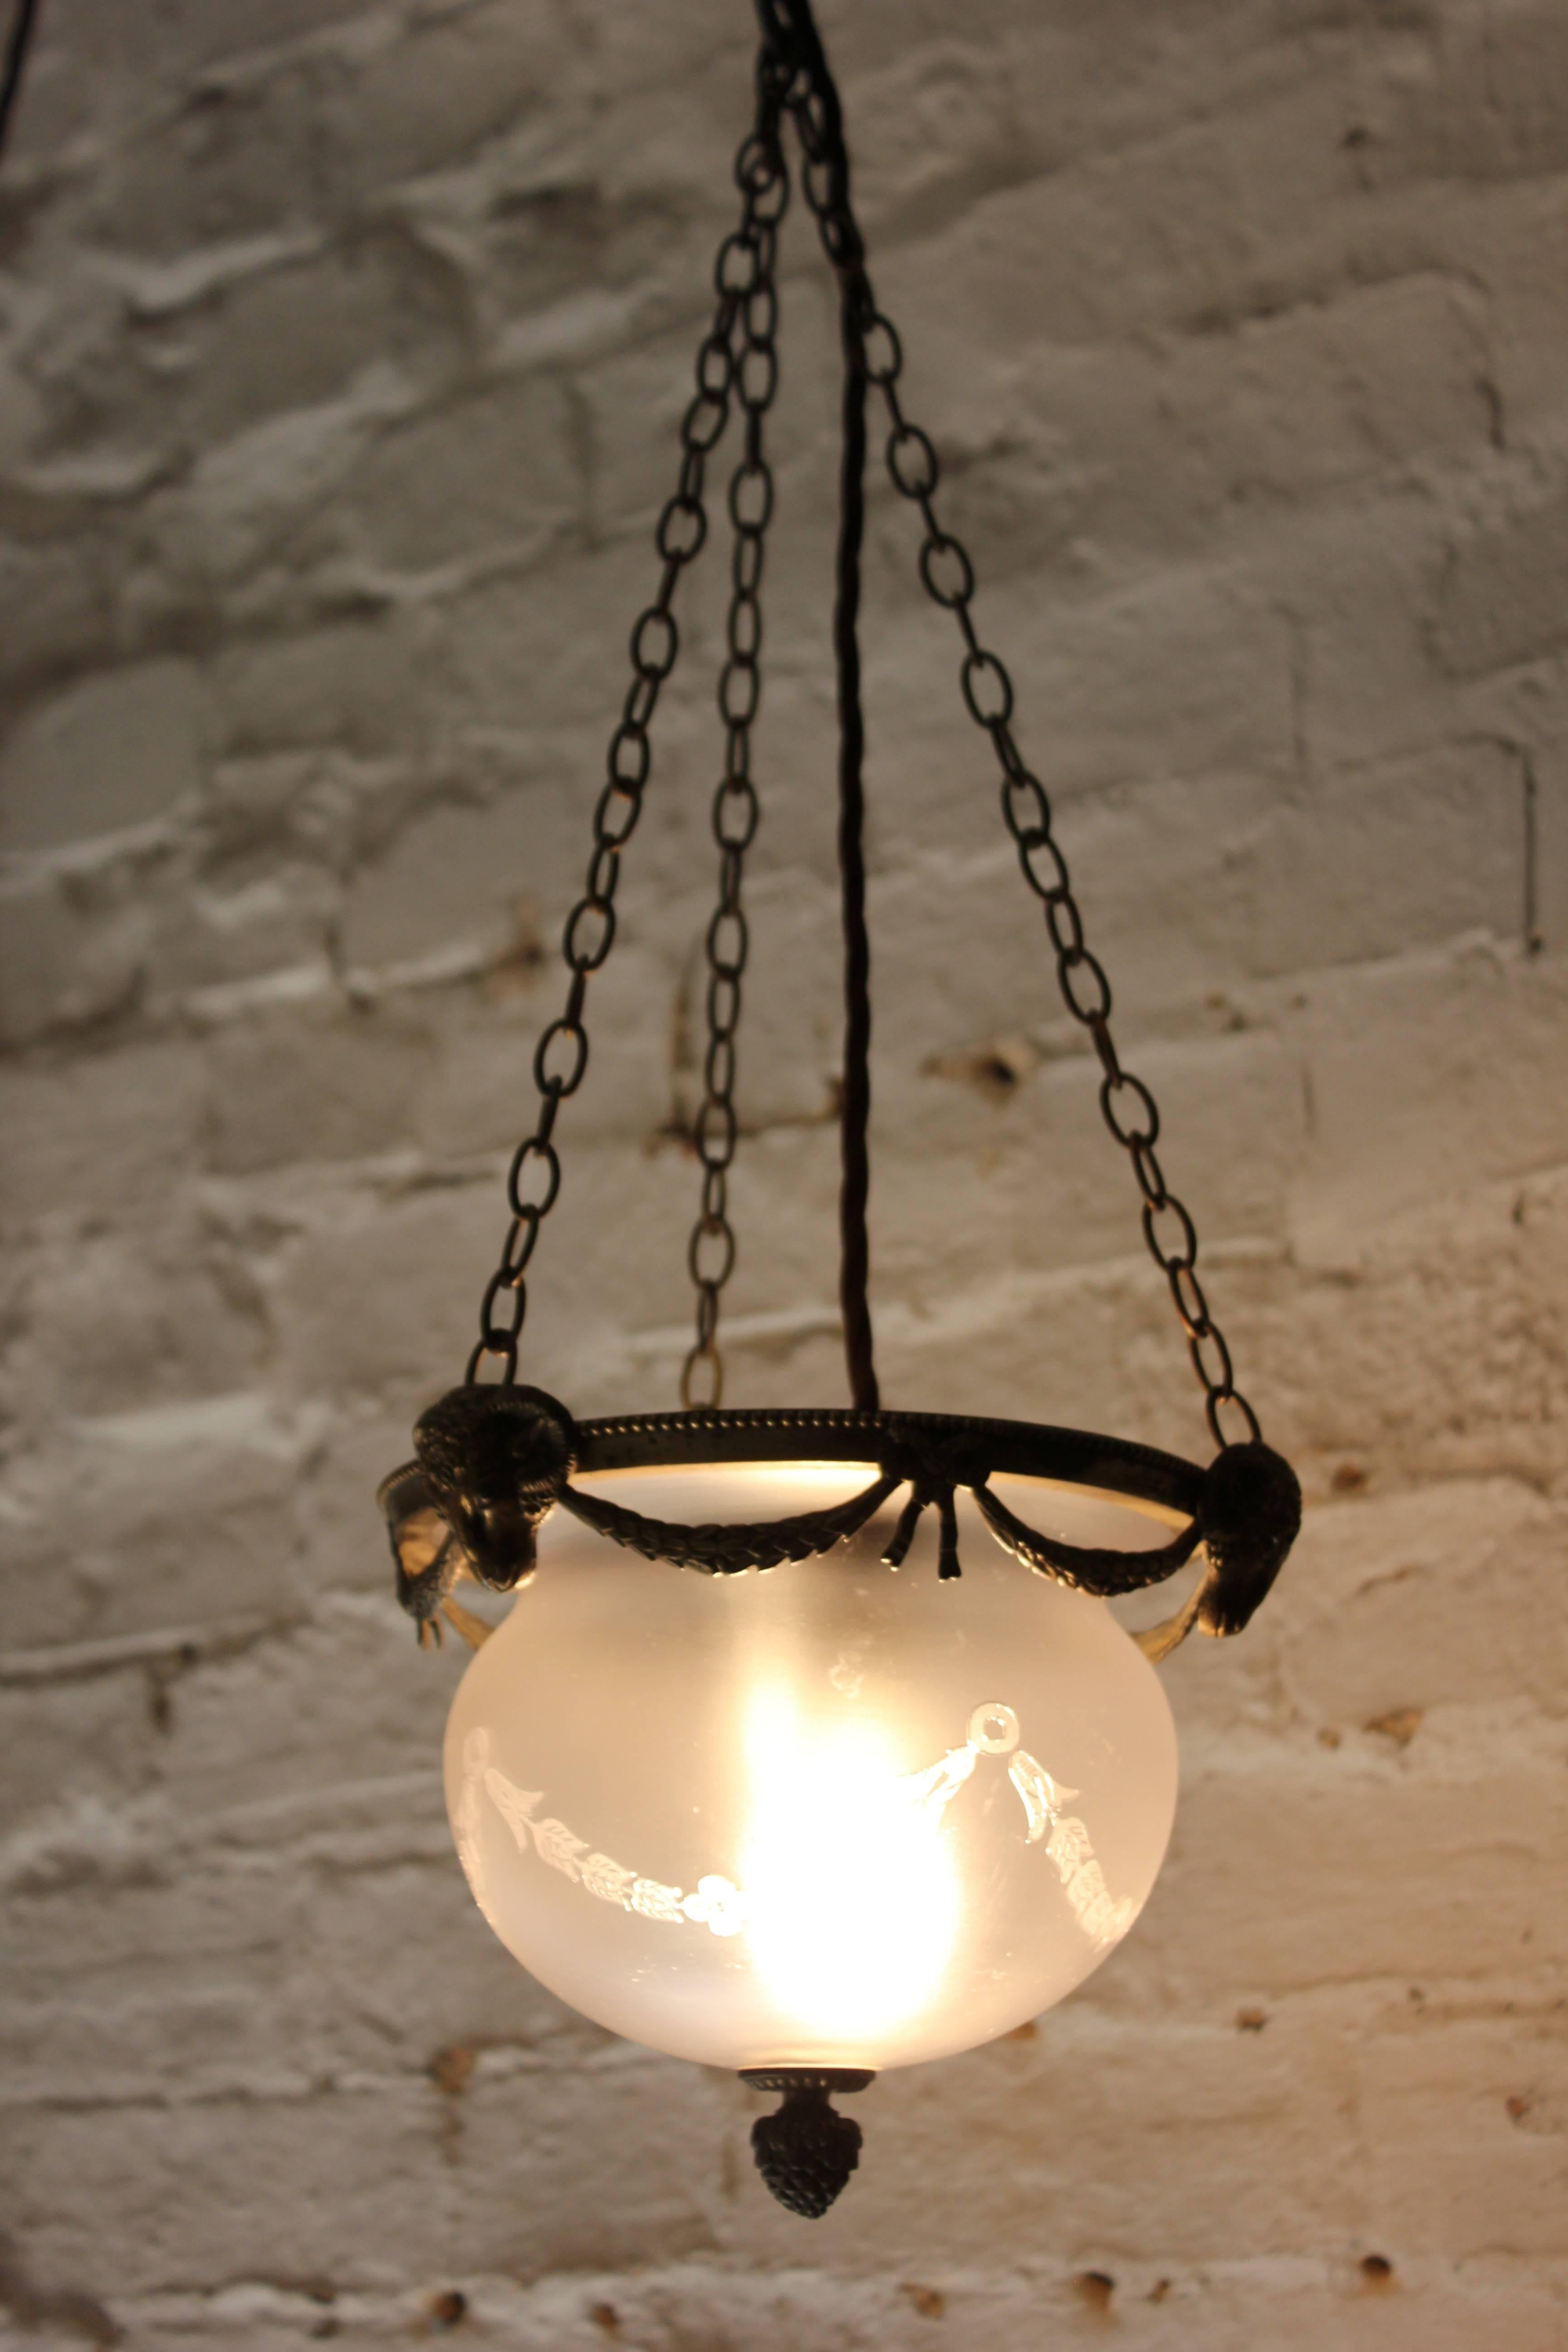 Edwardian Neoclassical Revival Brass and Acid Etched Glass Hanging Pendant Light 1